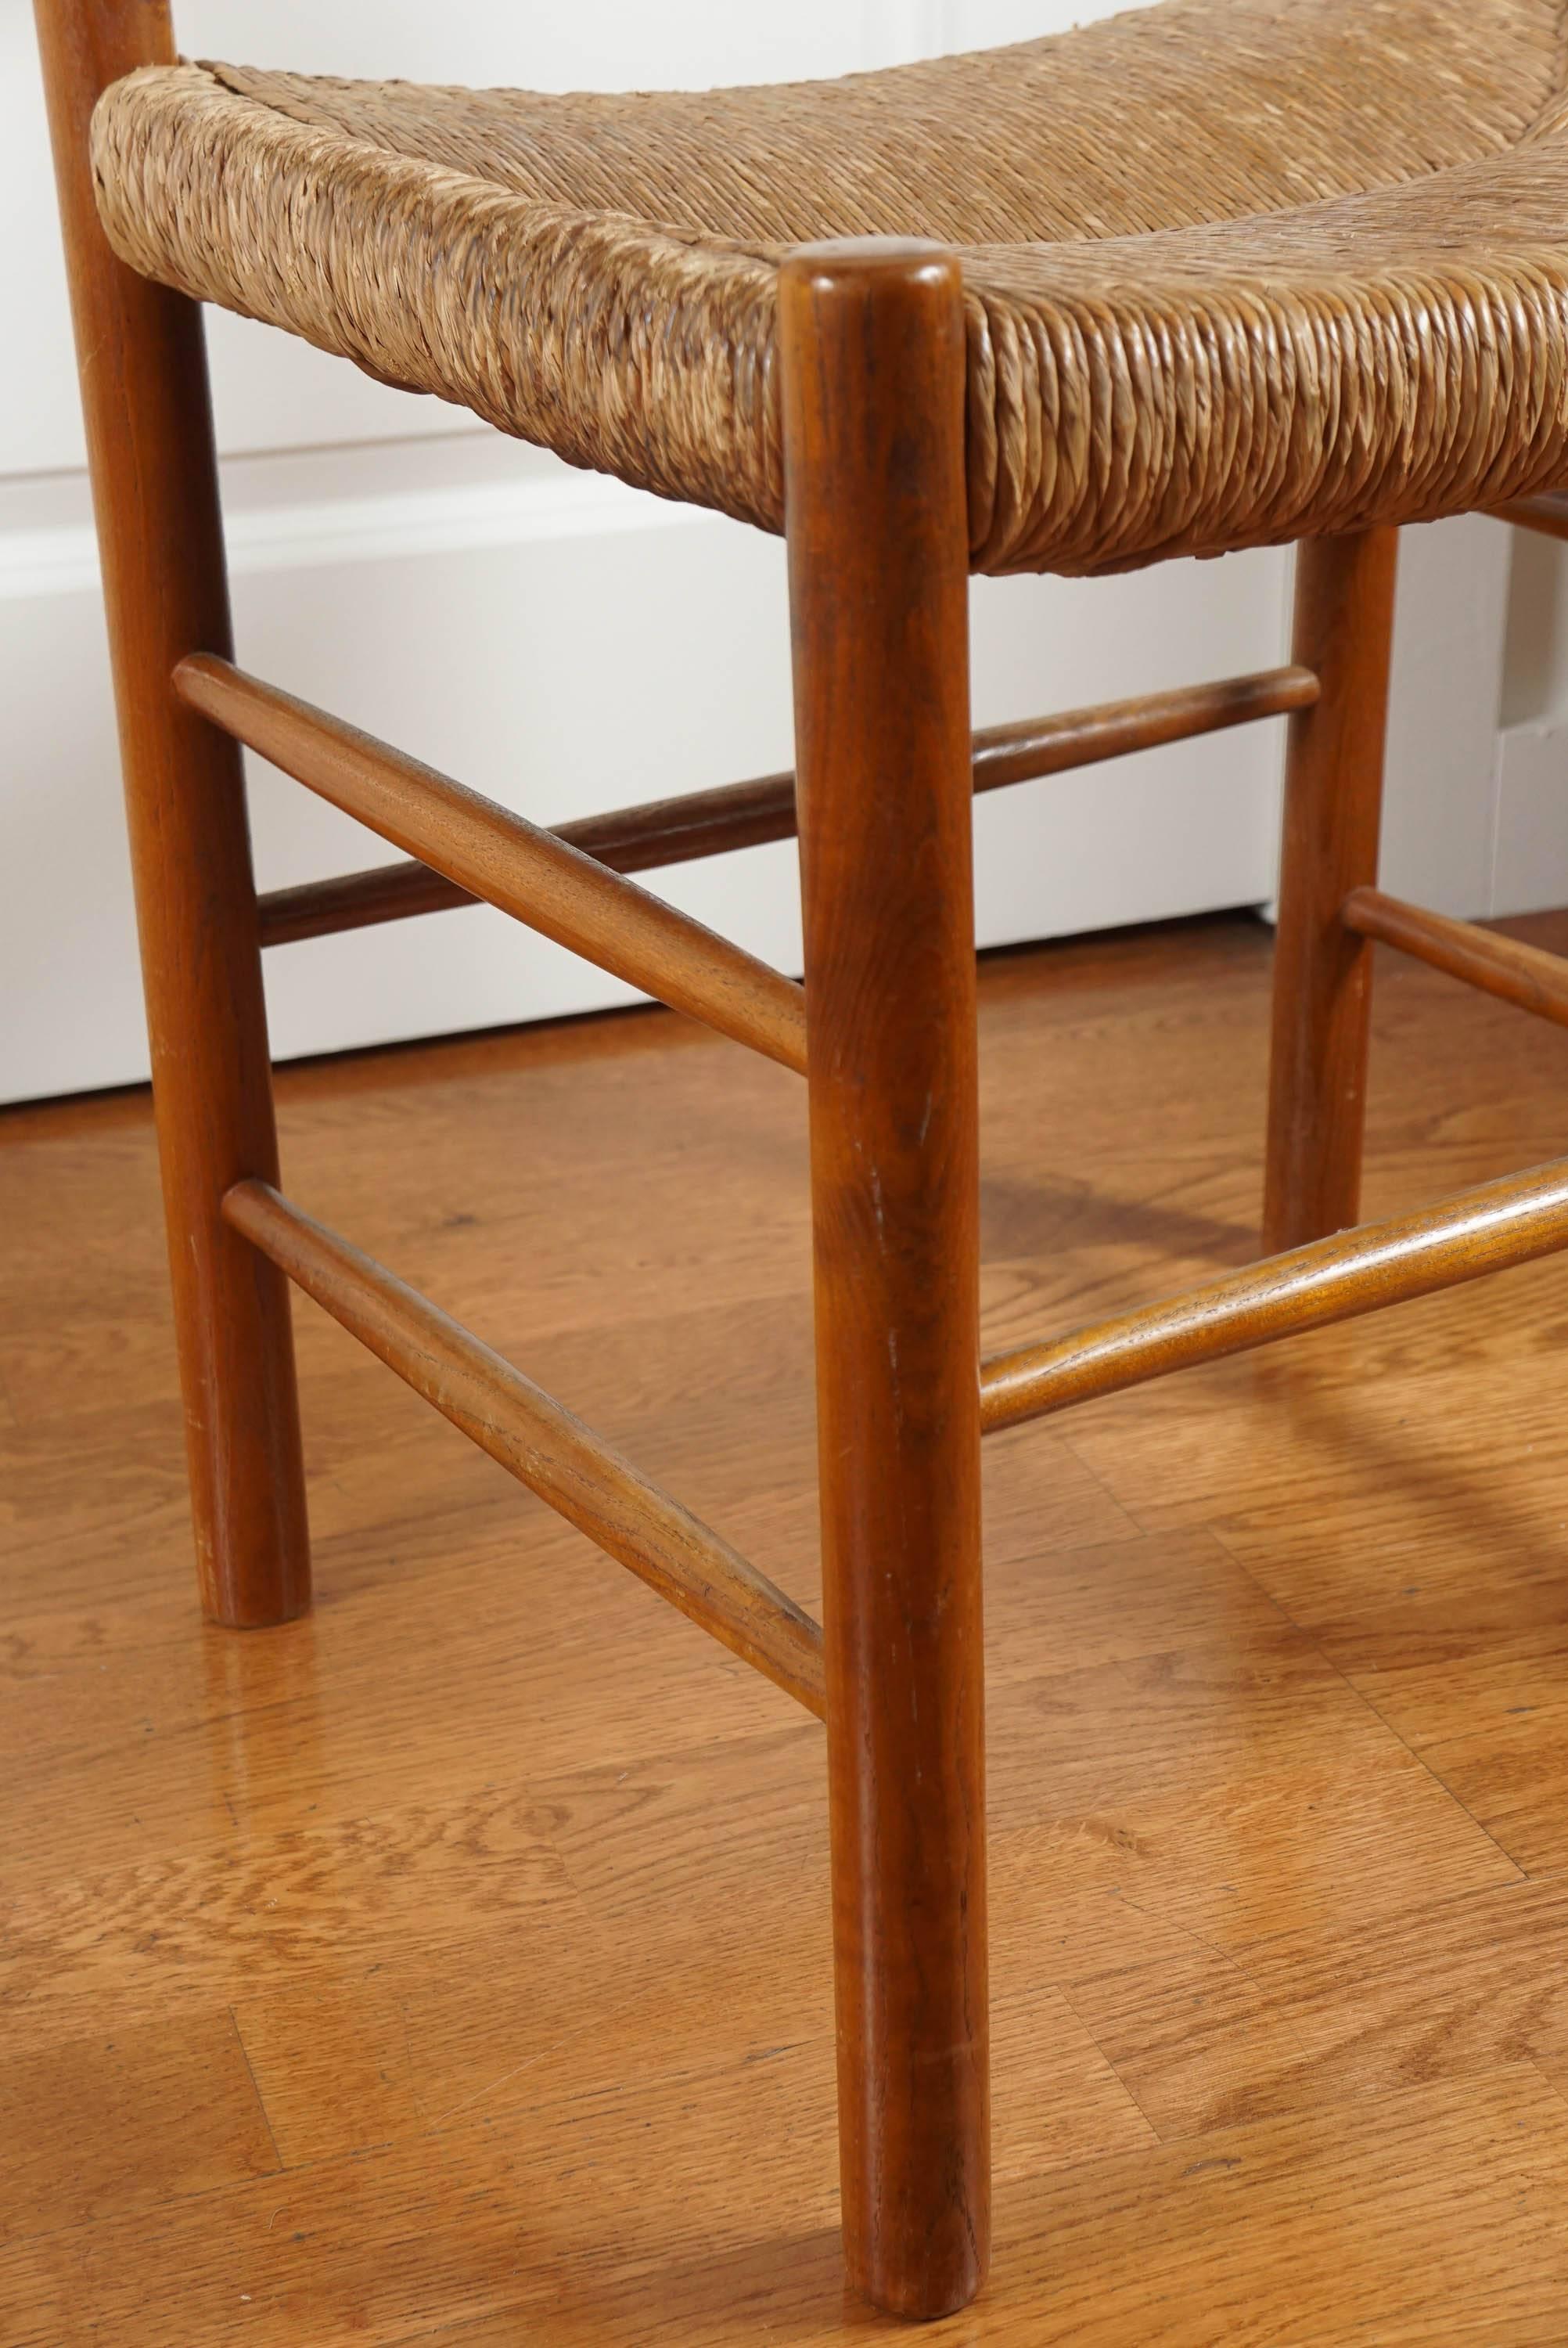 Mid-20th Century French Woven Dining Chair